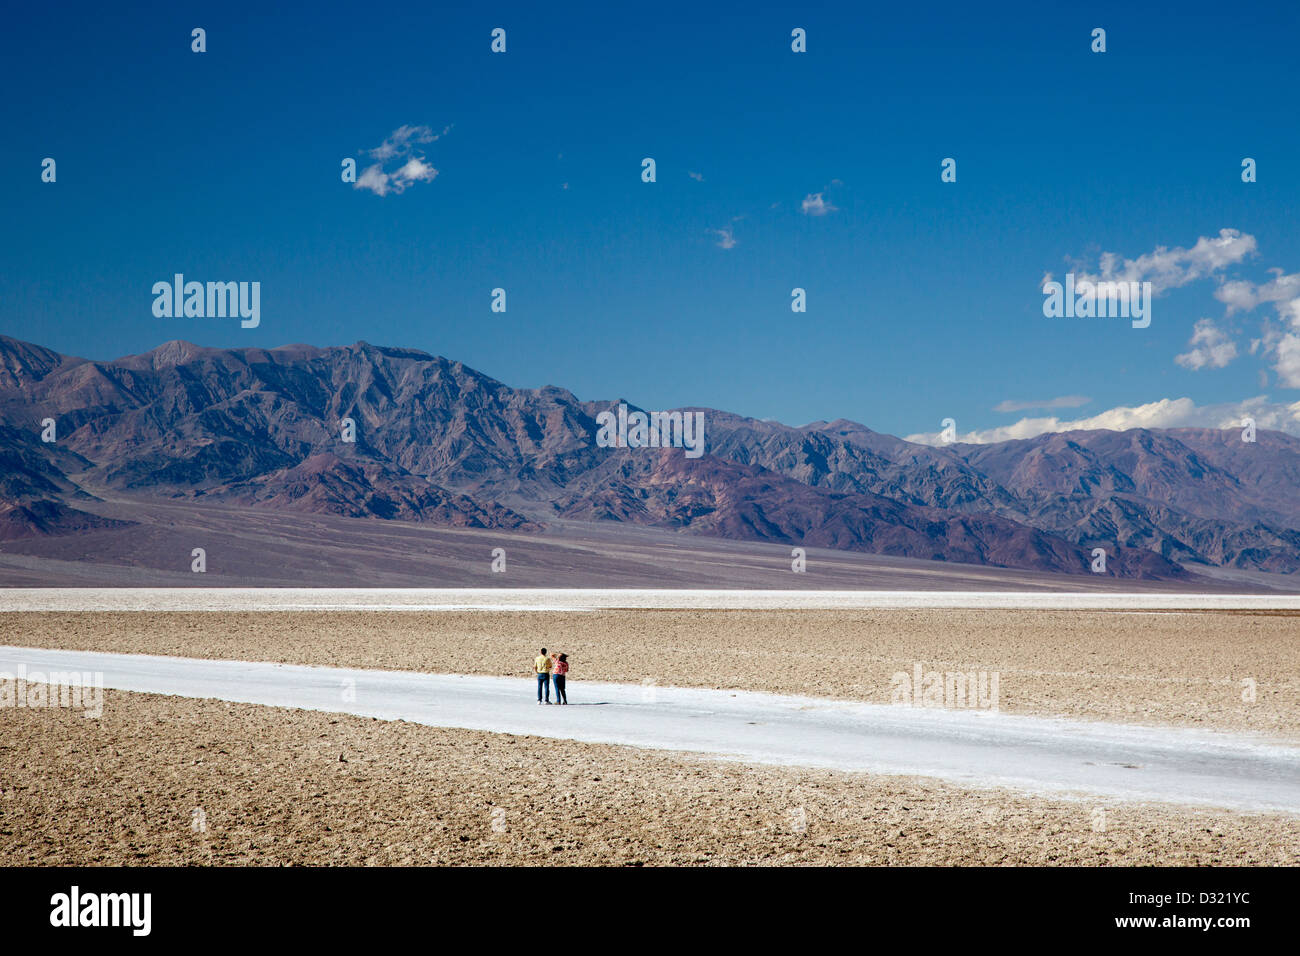 Death Valley National Park, California - Tourists on the salt flat in Badwater Basin. Stock Photo